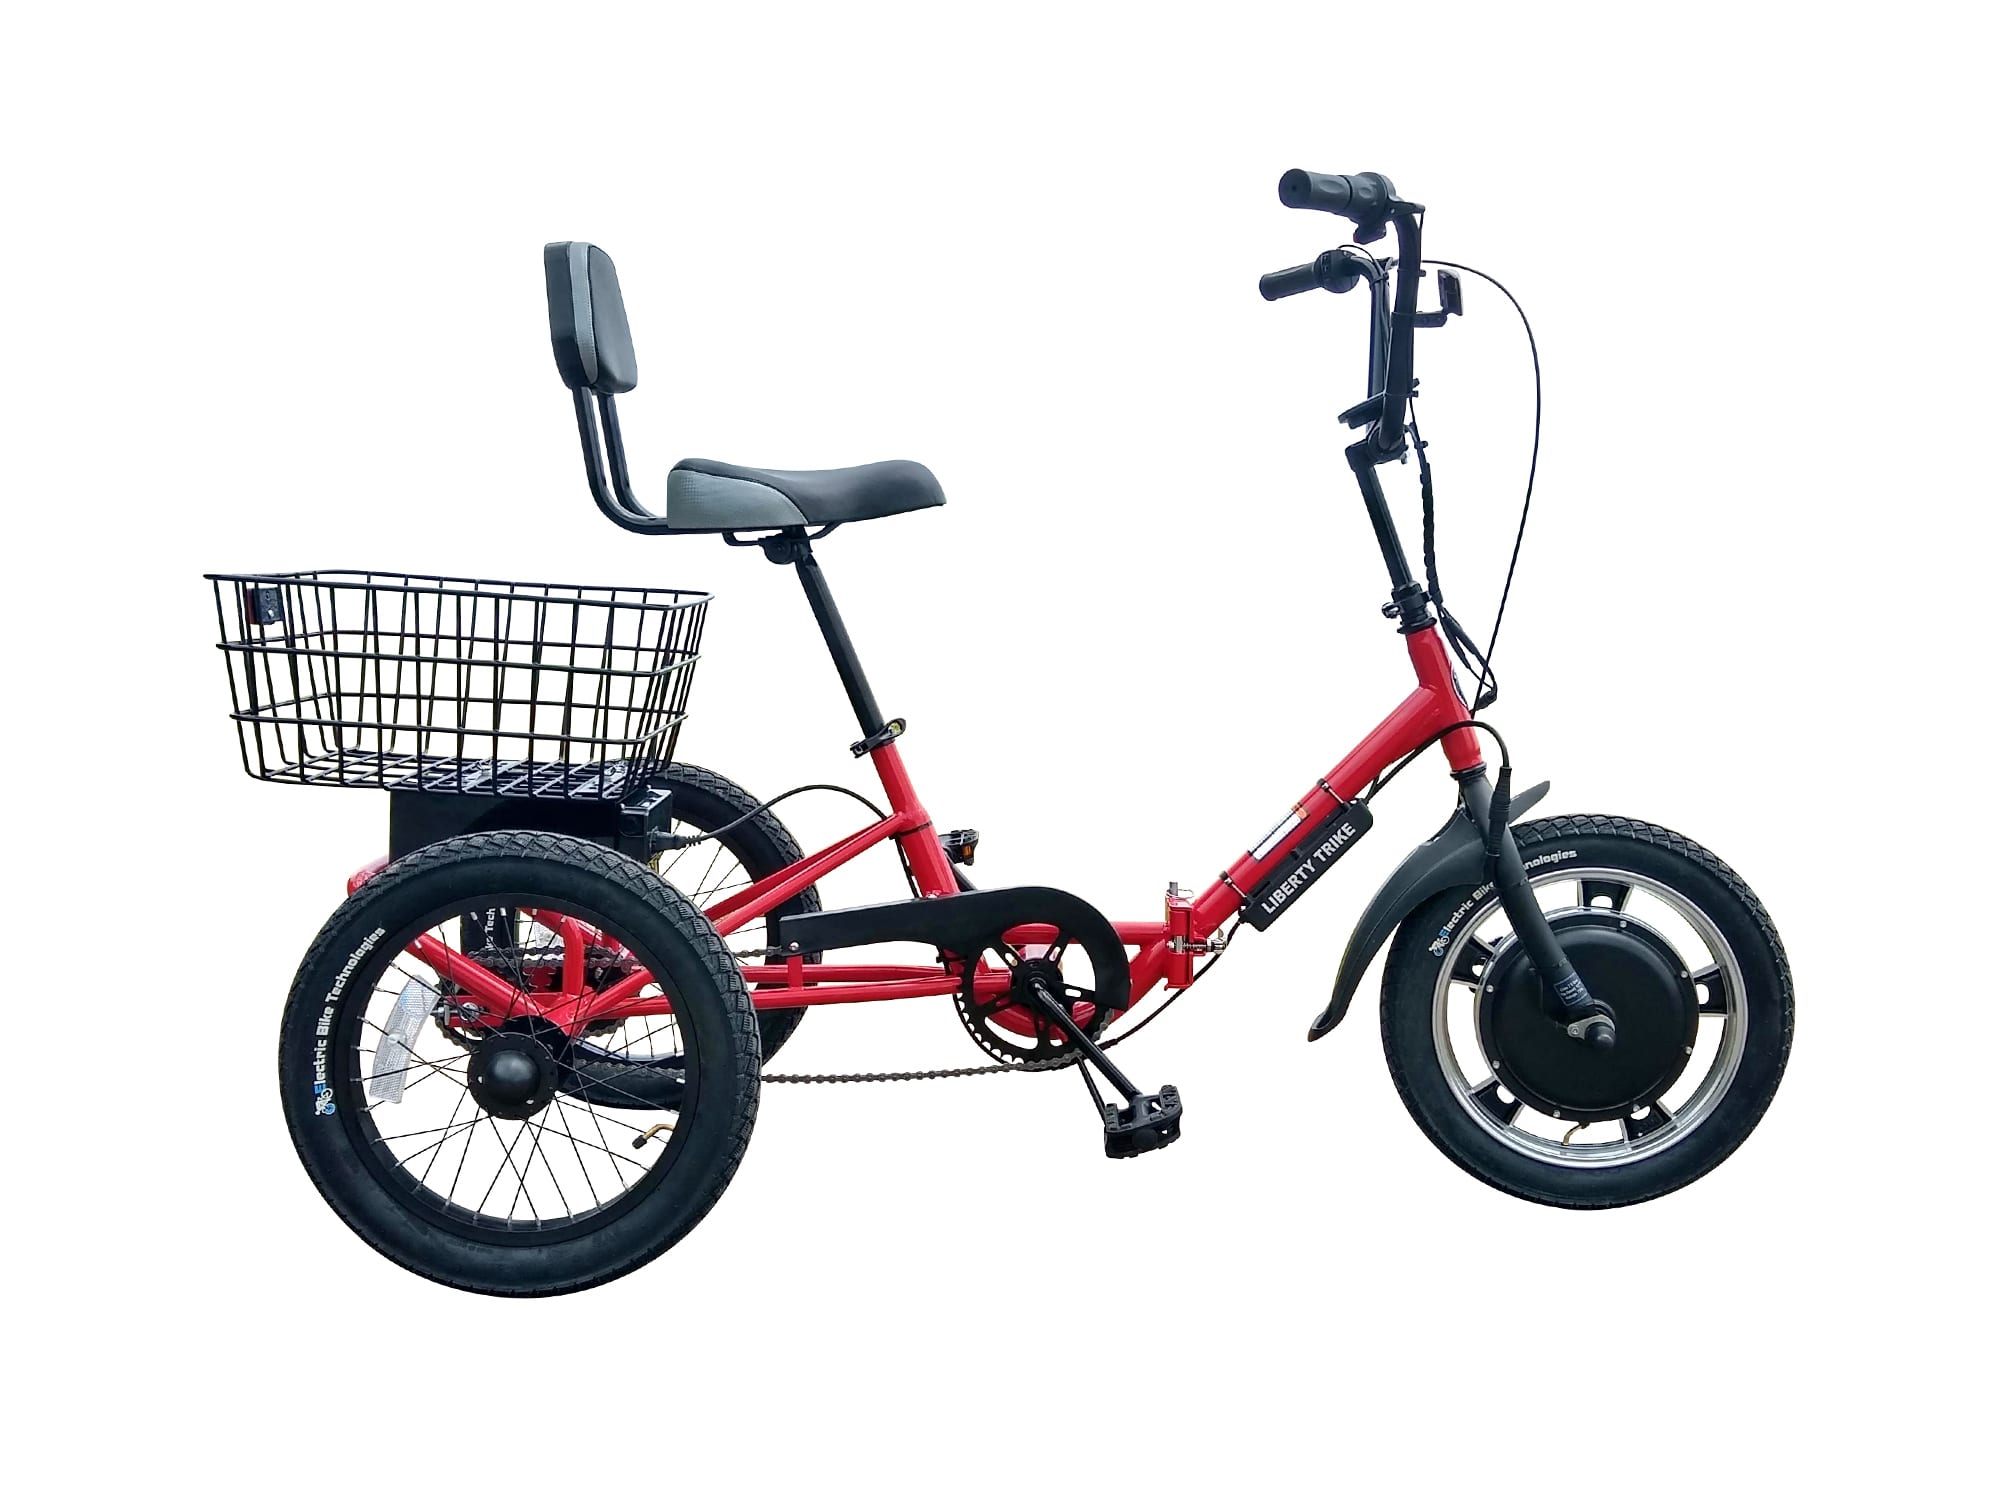 3 wheel electric tricycle